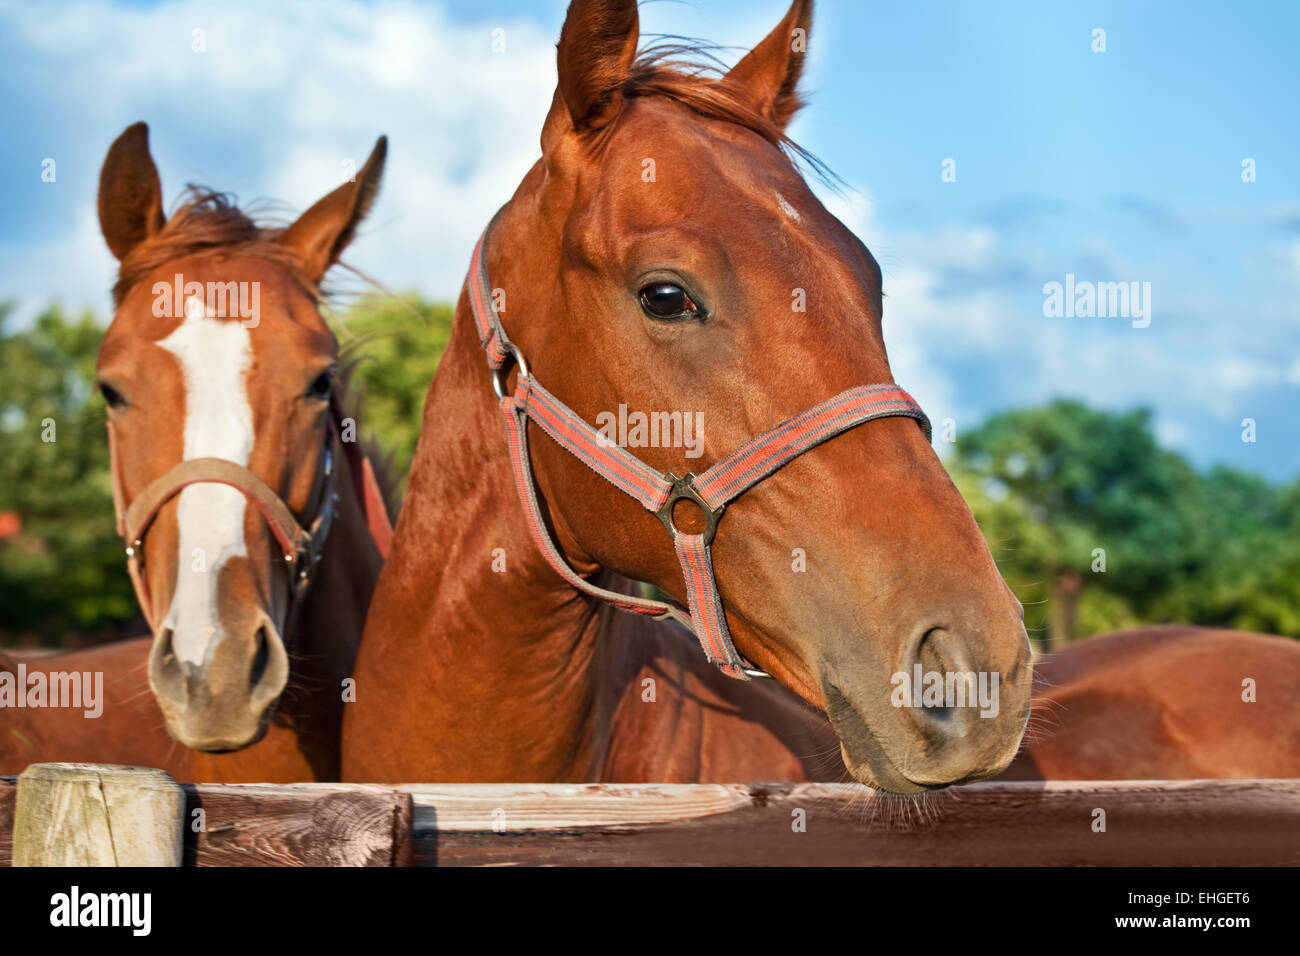 Closeup of the head of a horse Stock Photo